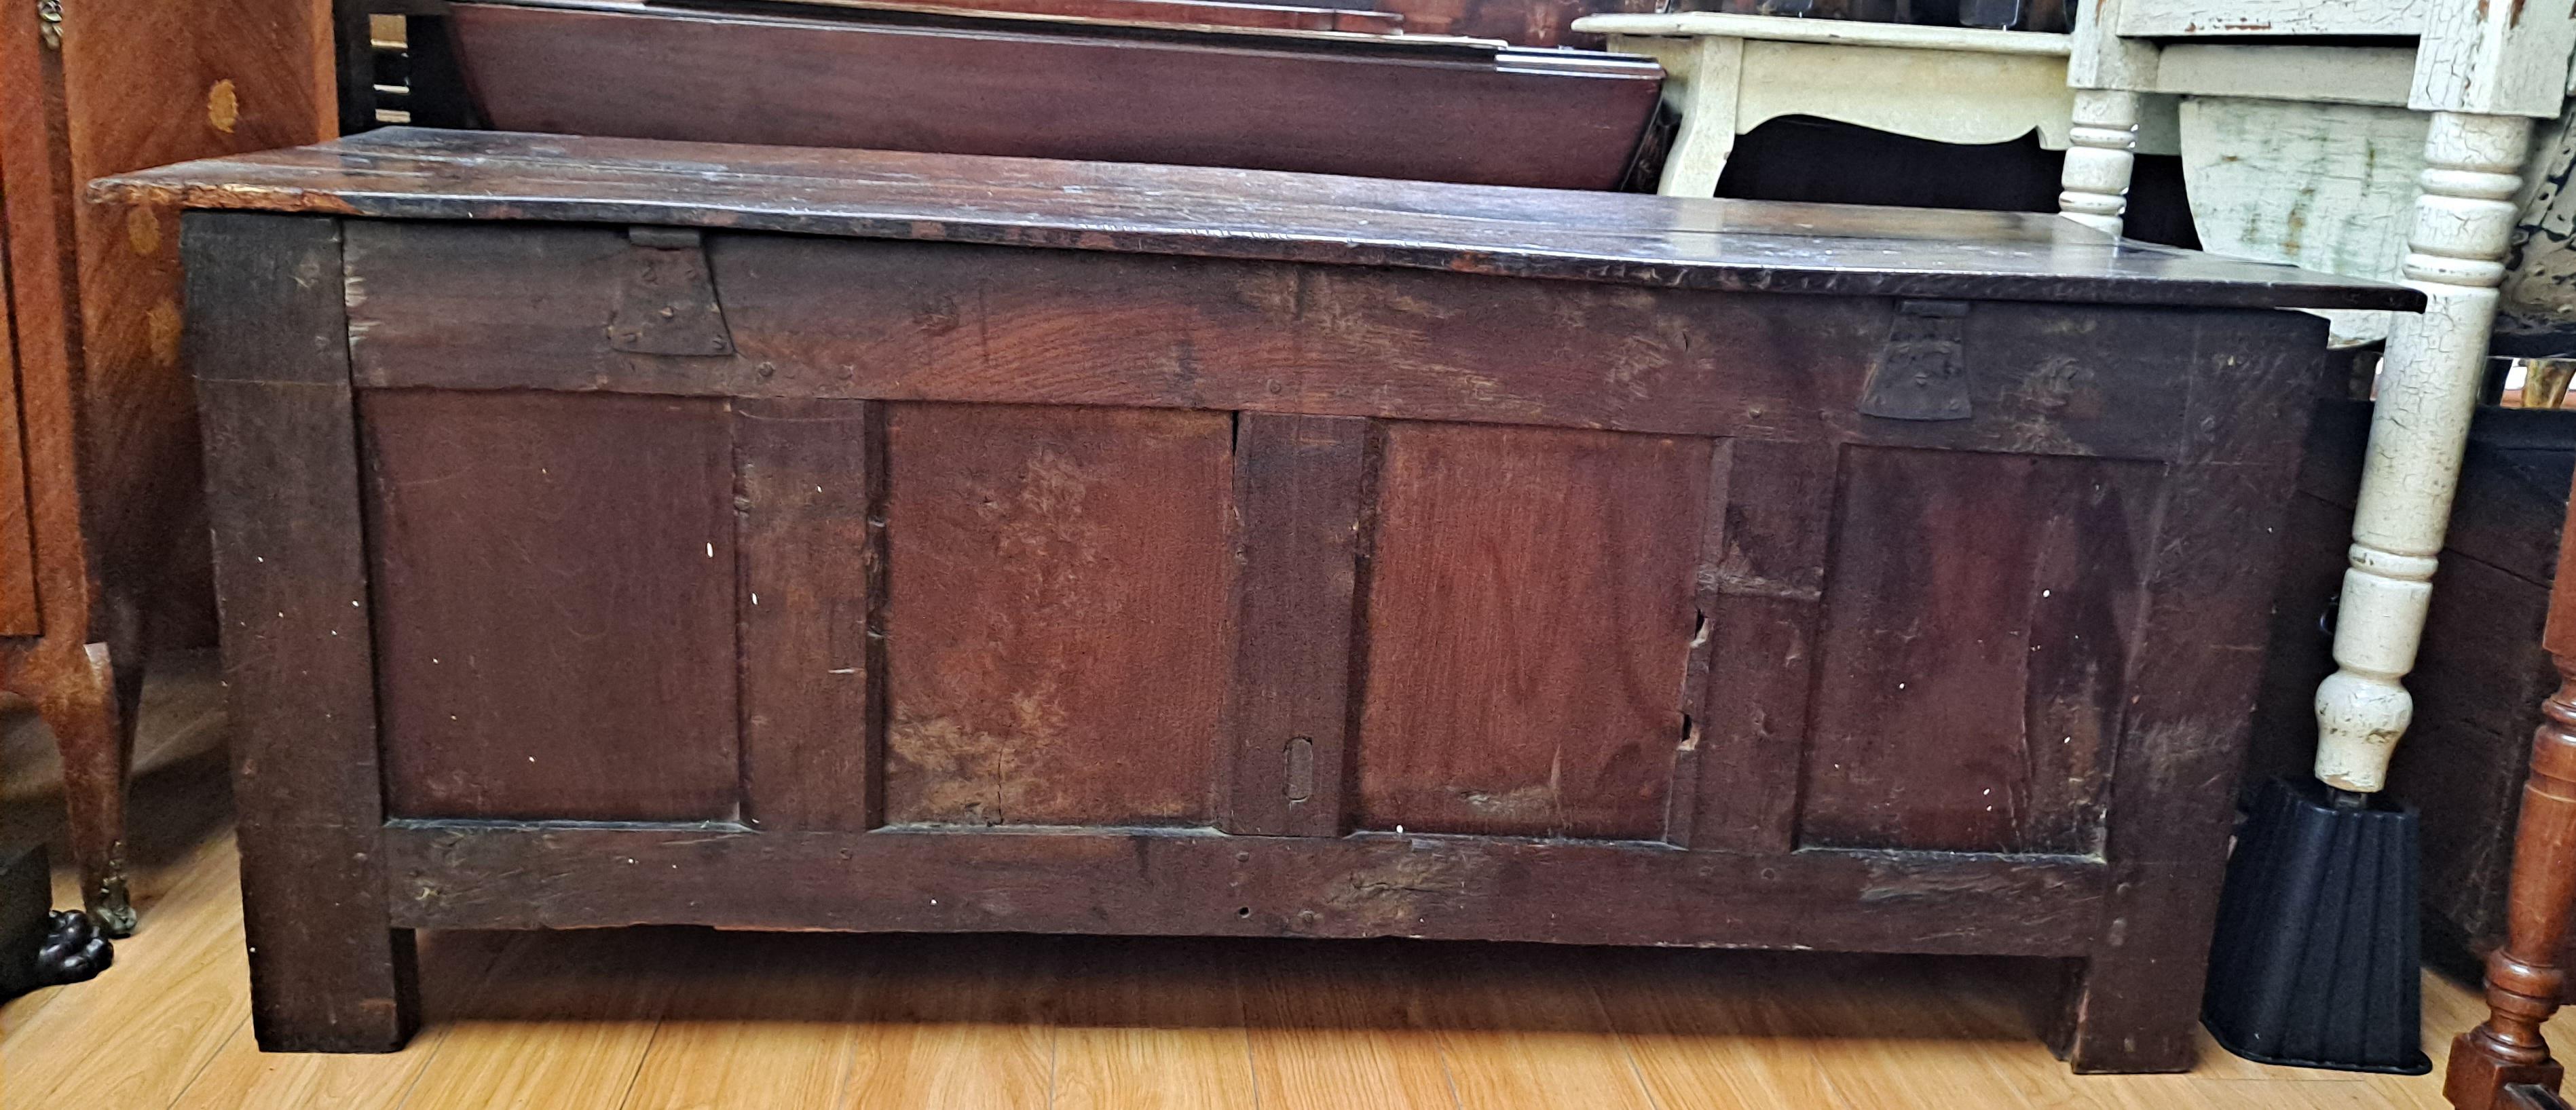 European Hand Carved Wood Blanket Chest Dated 1727 For Sale 6